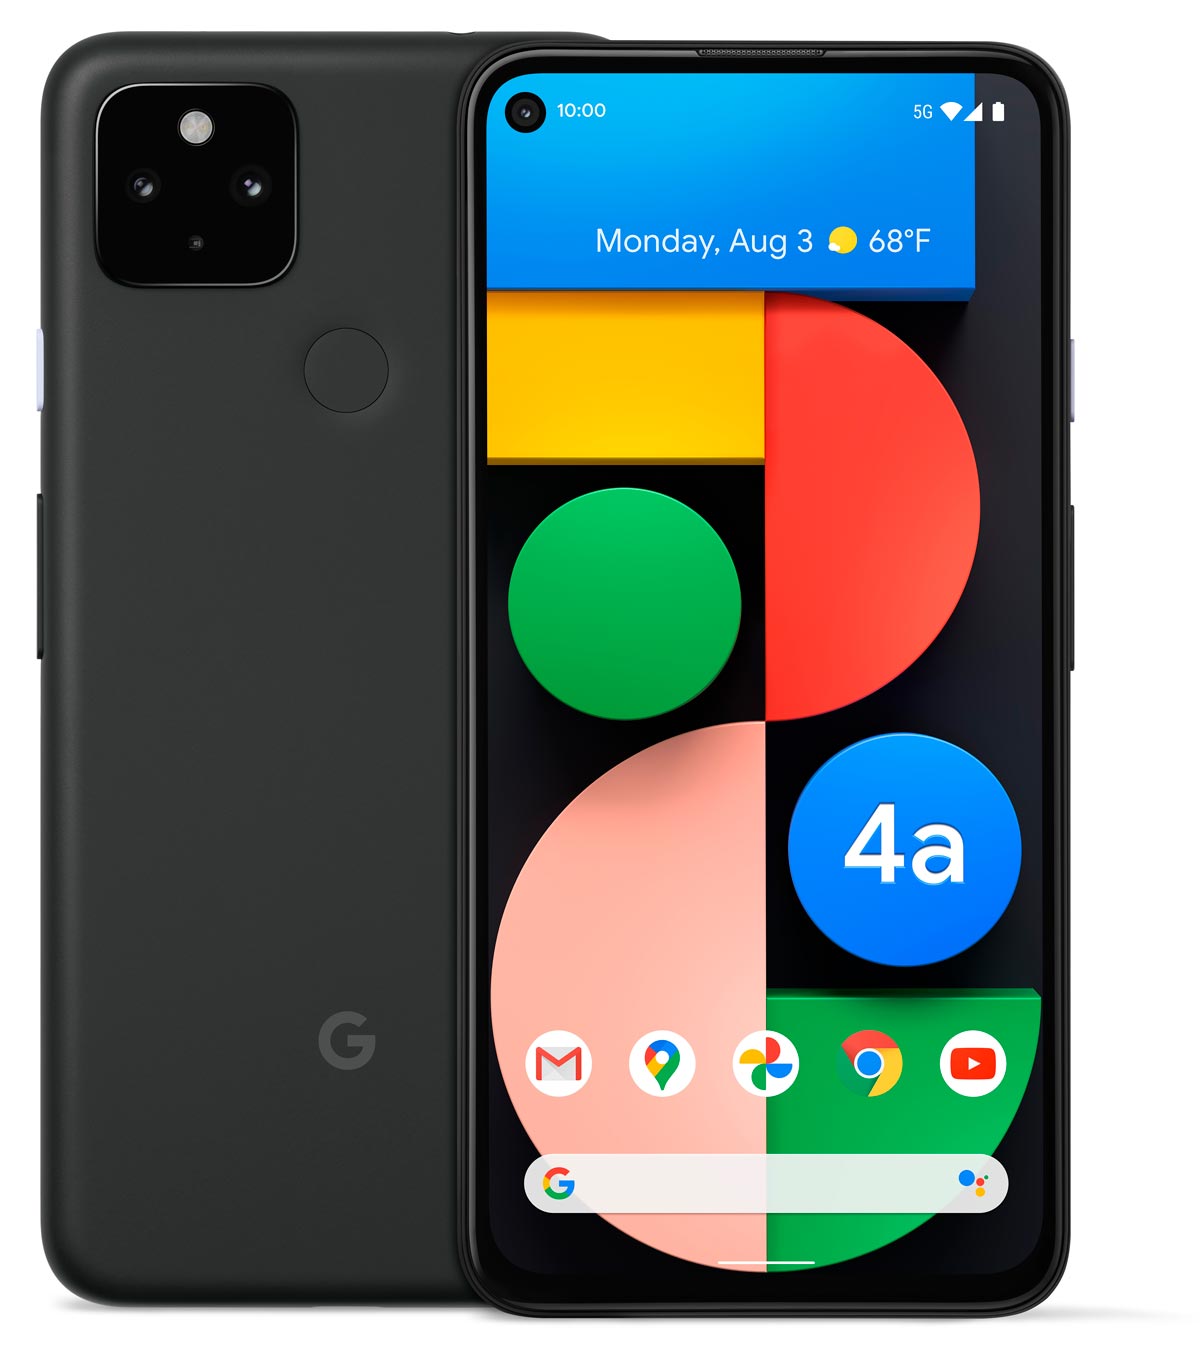 The Google Pixel 4a (5G) Android smartphone